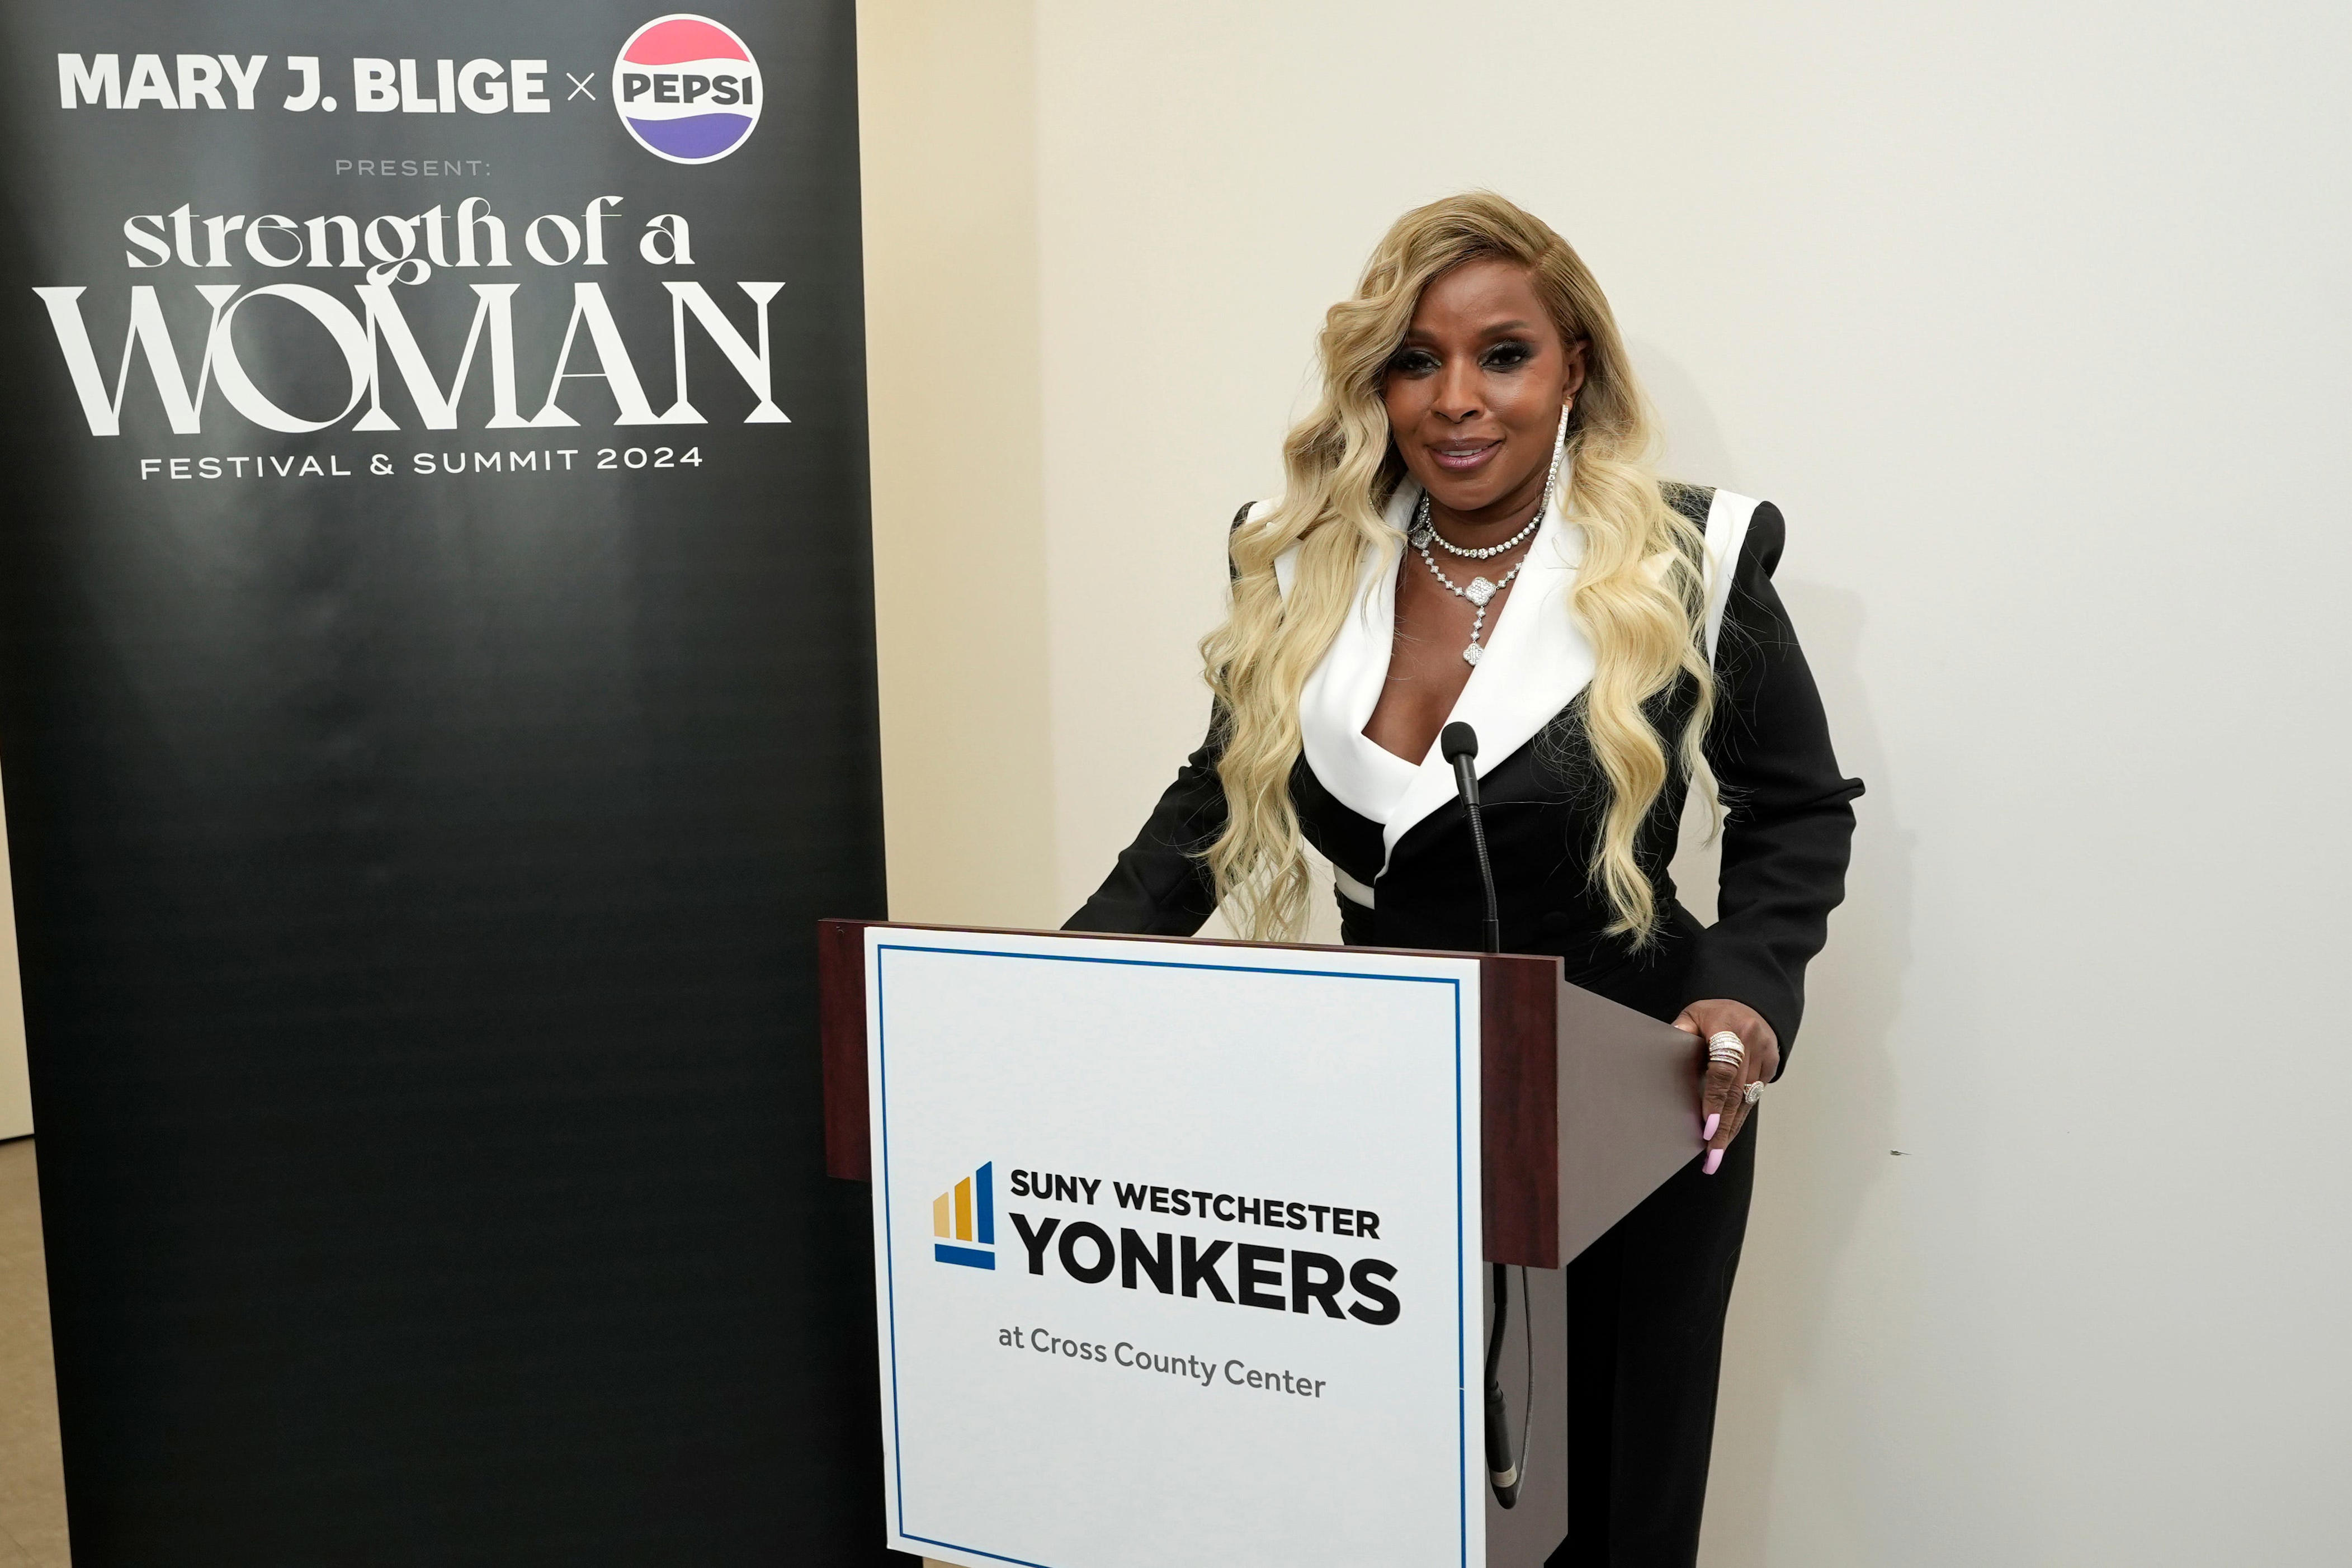 mary j. blige asserts herself with strength of a woman: 'allow me to reintroduce myself'